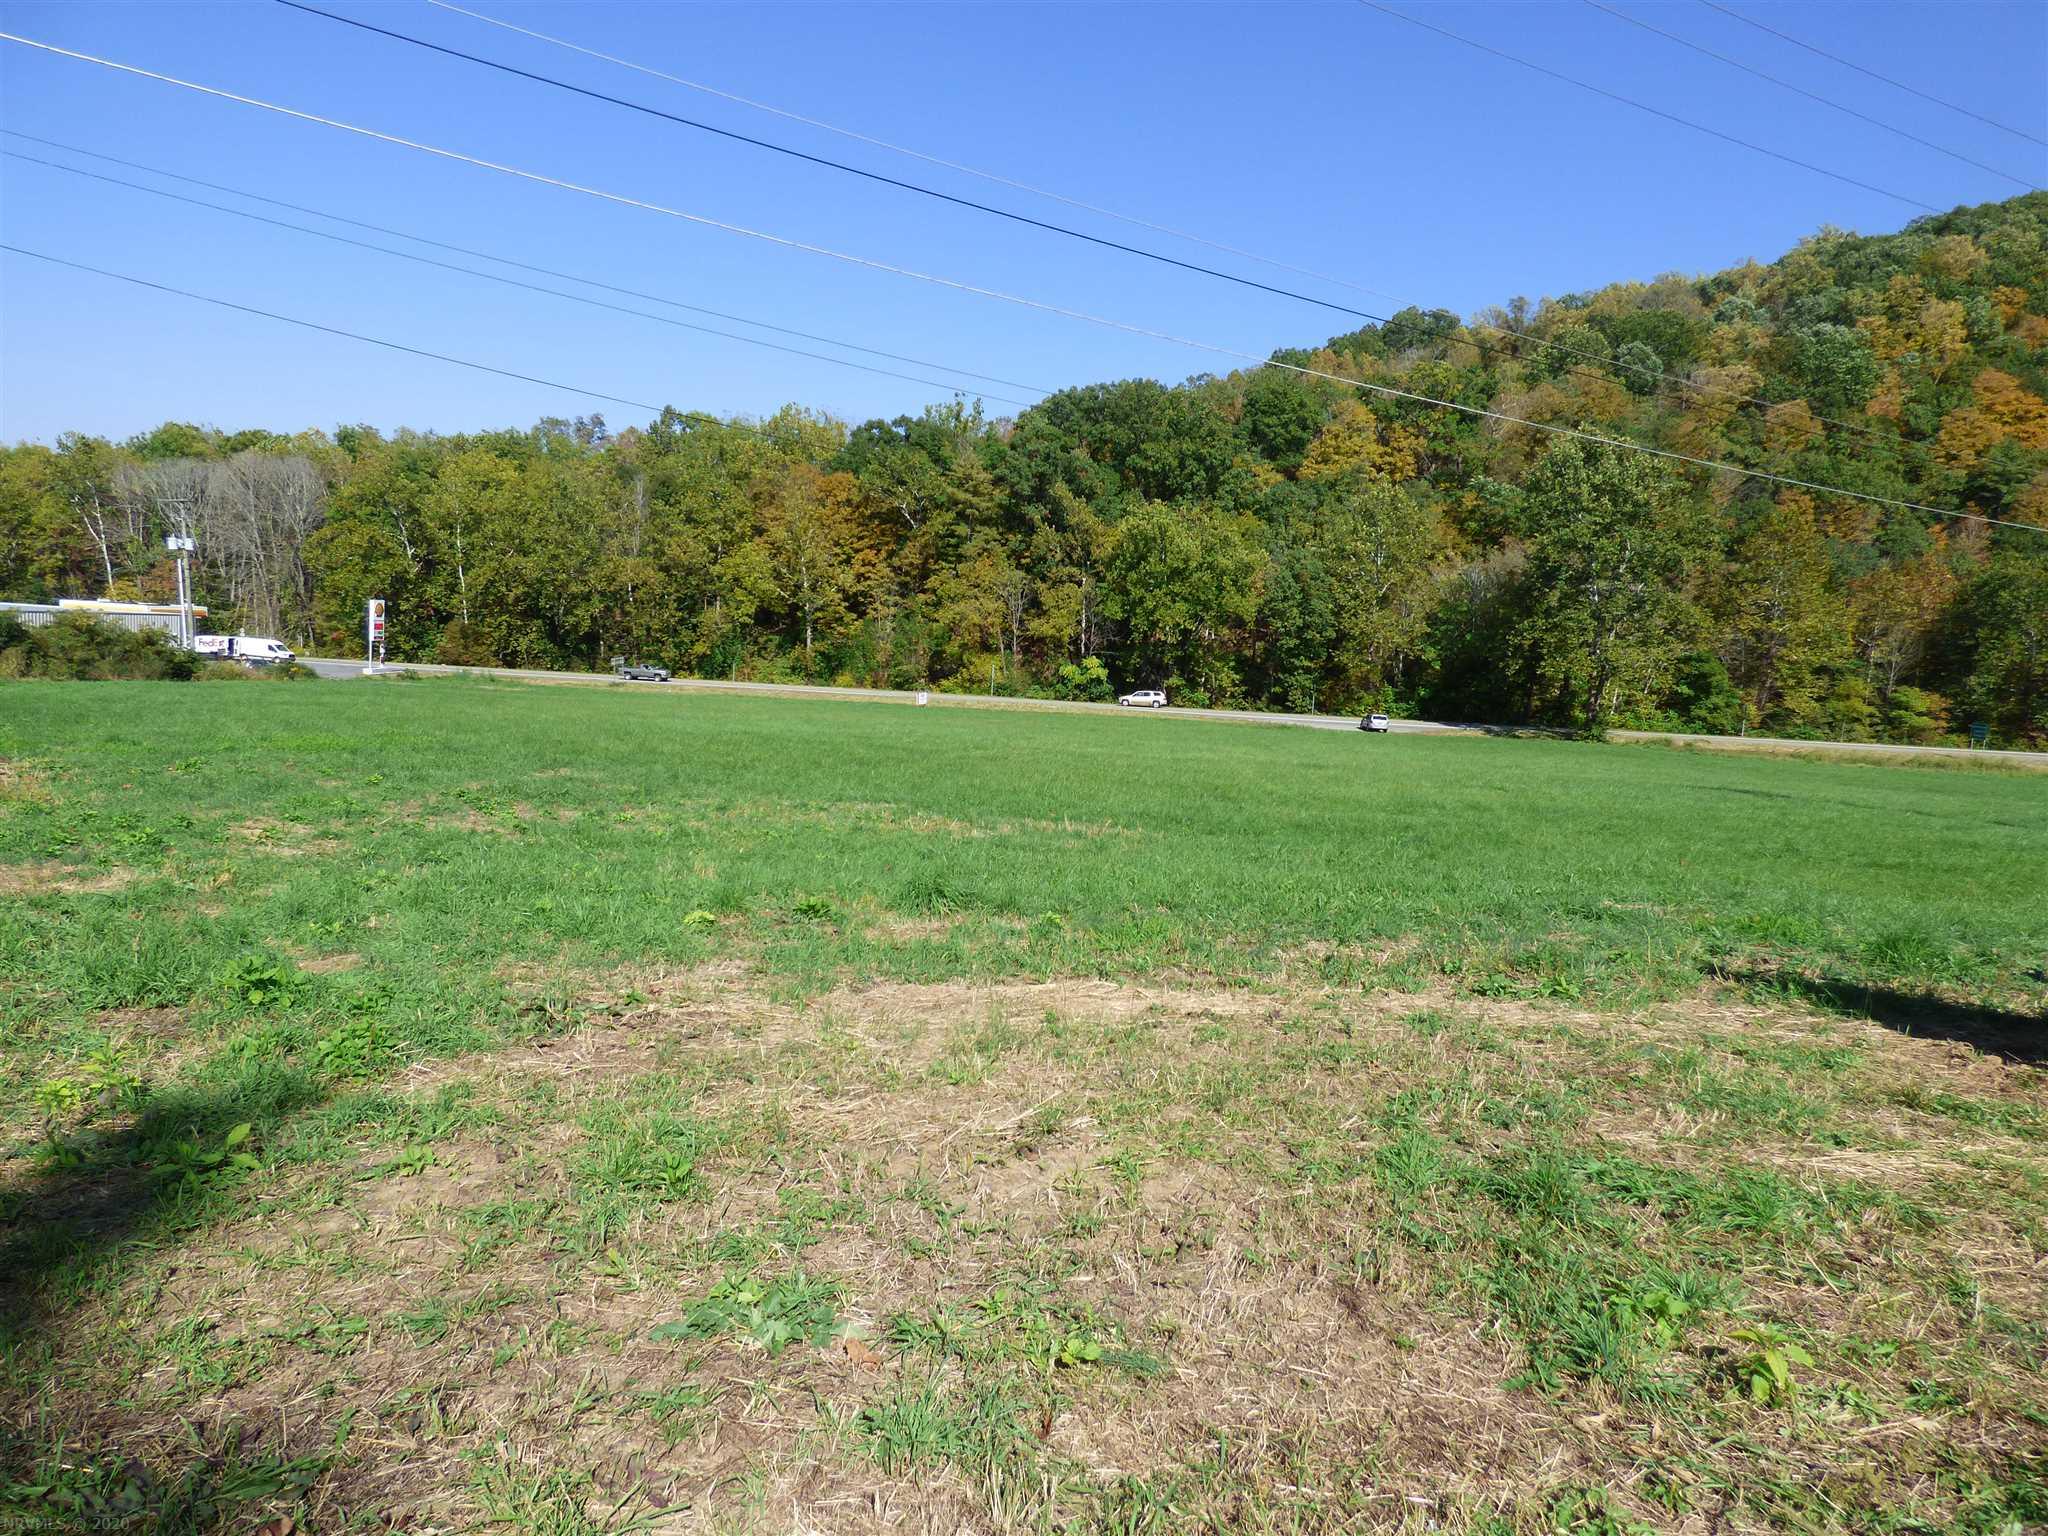 tbd Fort Chiswell Road, Austinville, VA 24312